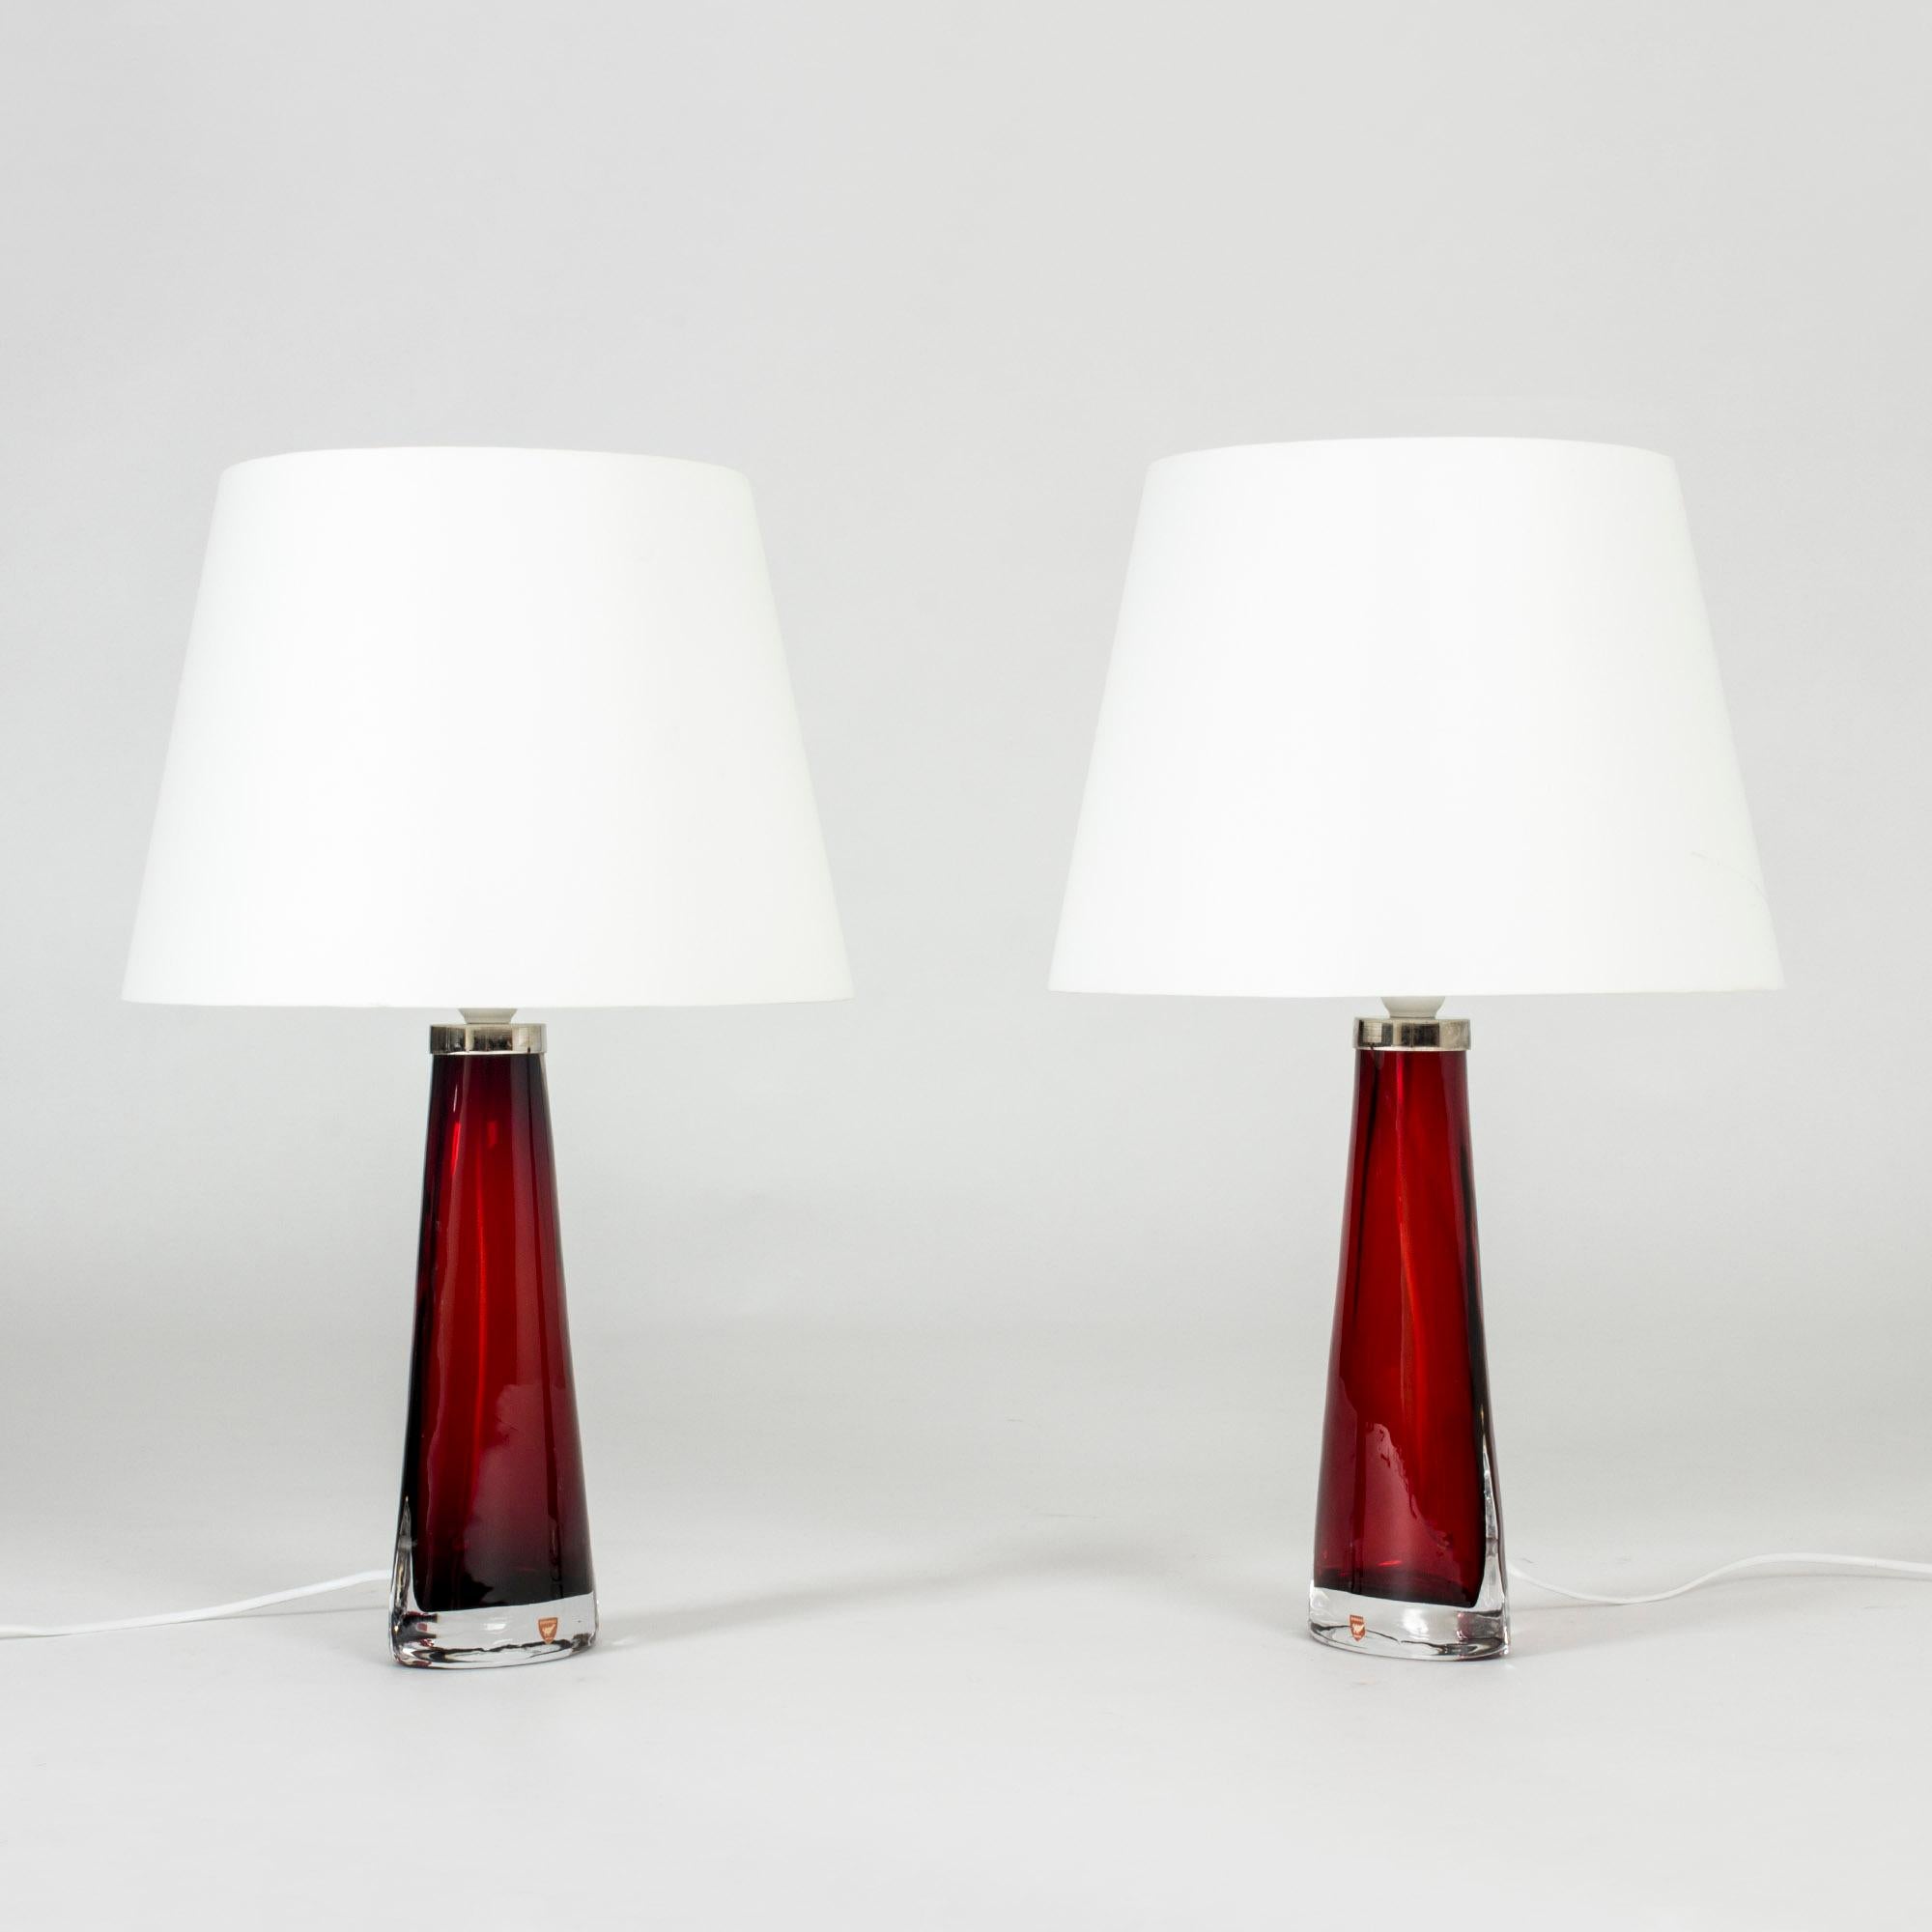 Pair of striking glass table lamps by Carl Fagerlund, made from rich red glass in a narrow conical shape, oval at the base. Beautiful translucent color, elegant design.